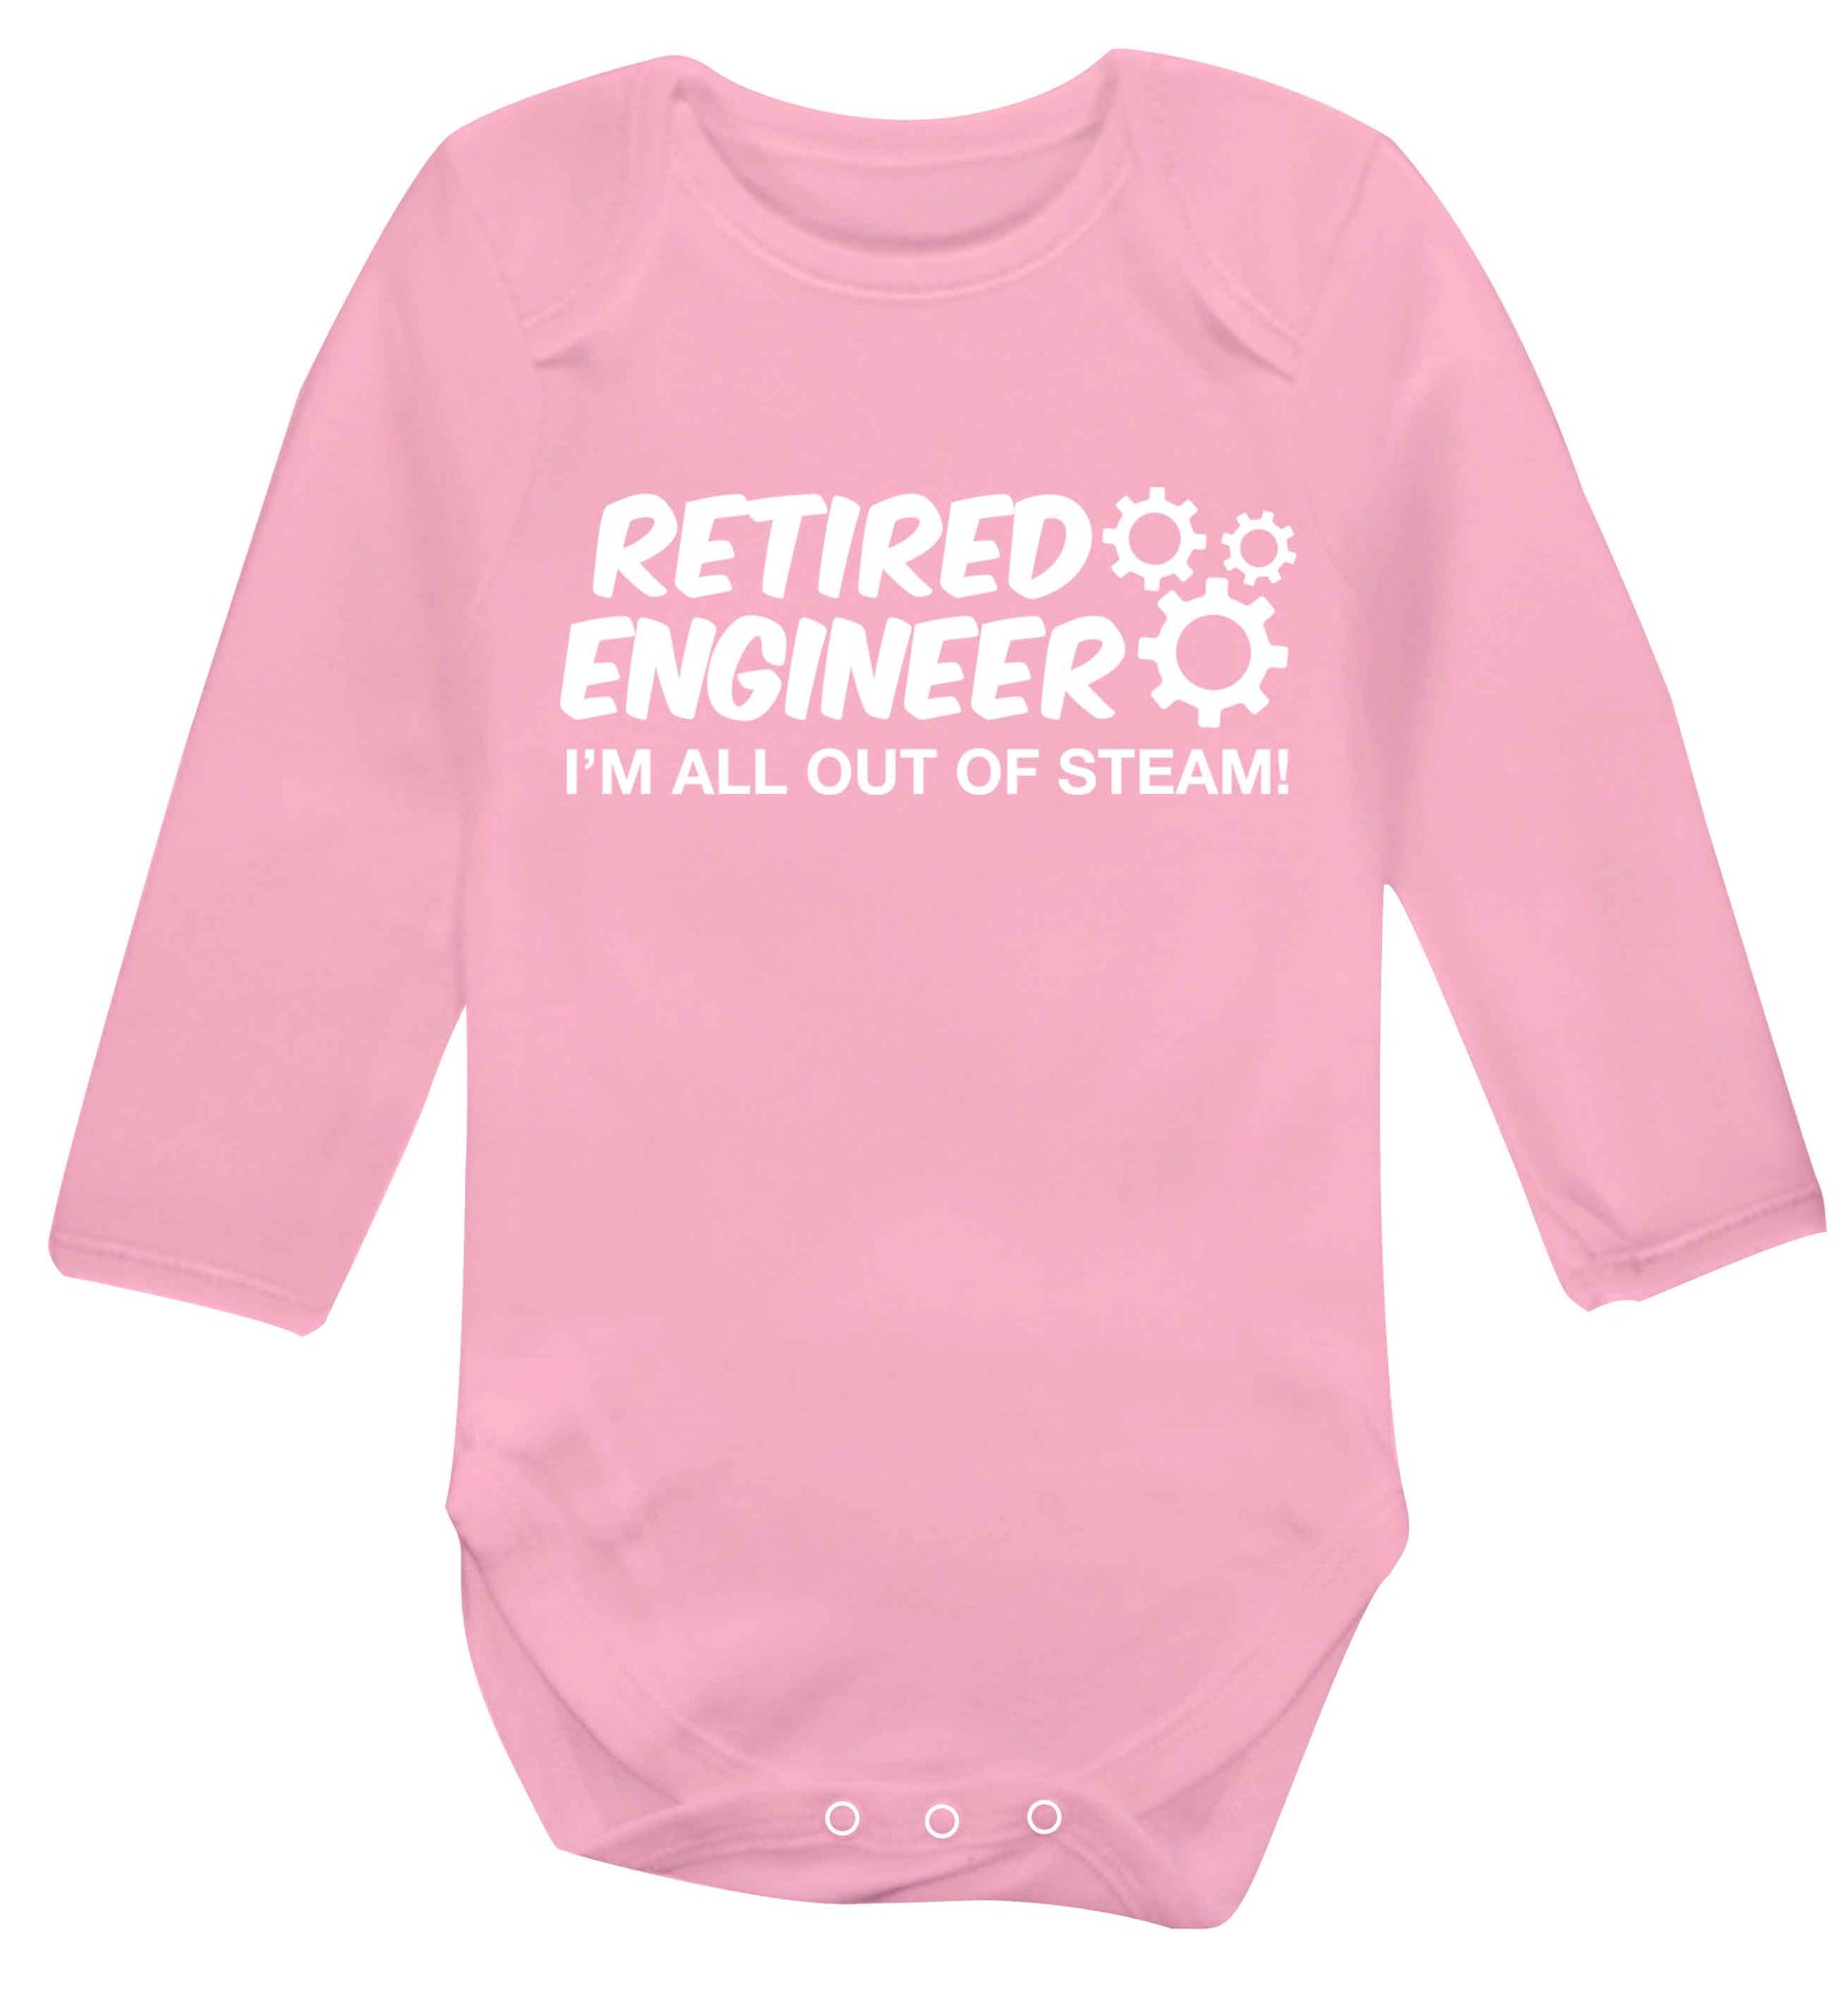 Retired engineer I'm all out of steam Baby Vest long sleeved pale pink 6-12 months